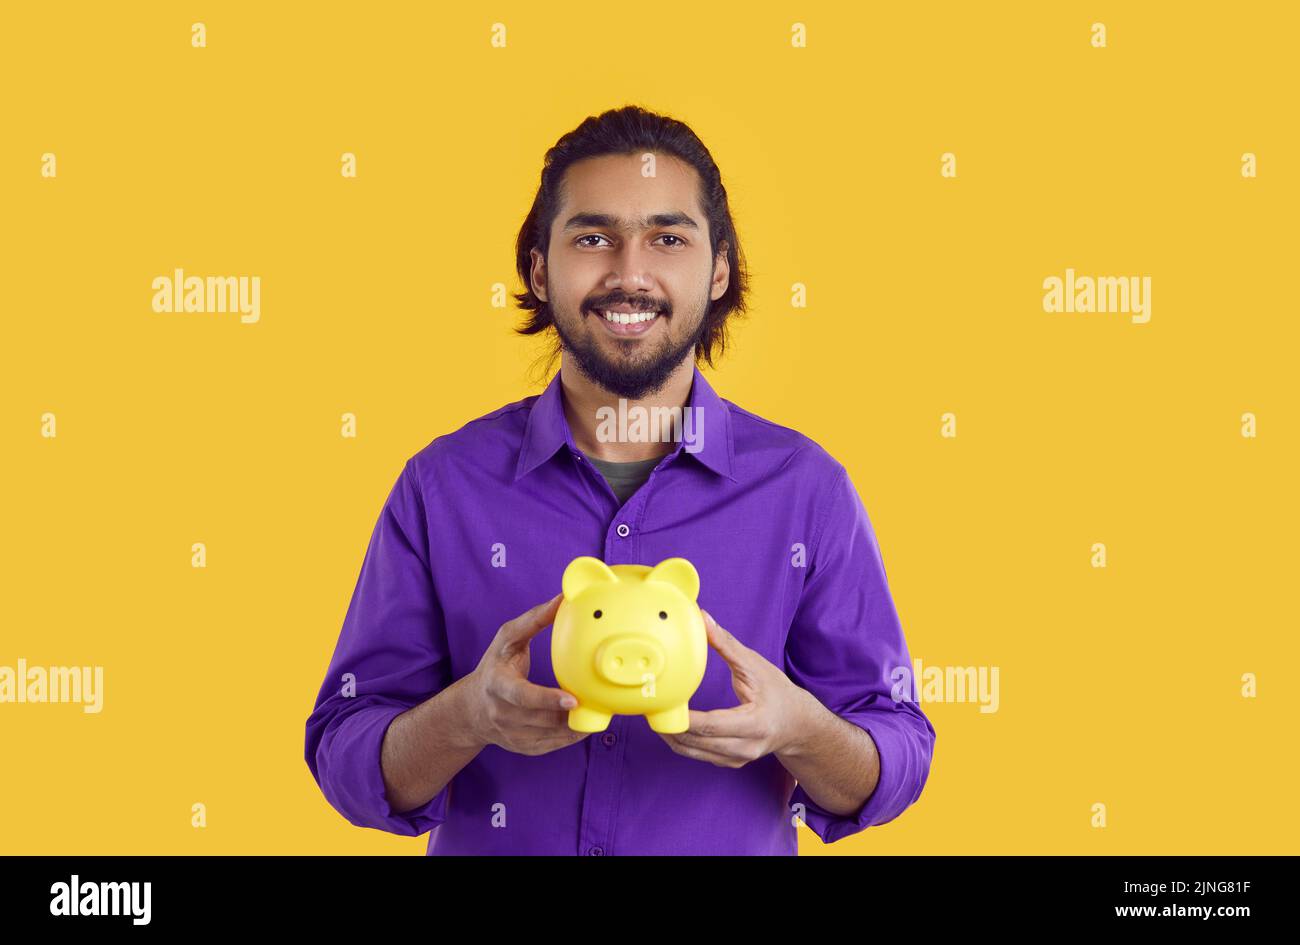 Young happy Indian man with smile shows piggy bank symbolizing saving money stands in studio Stock Photo